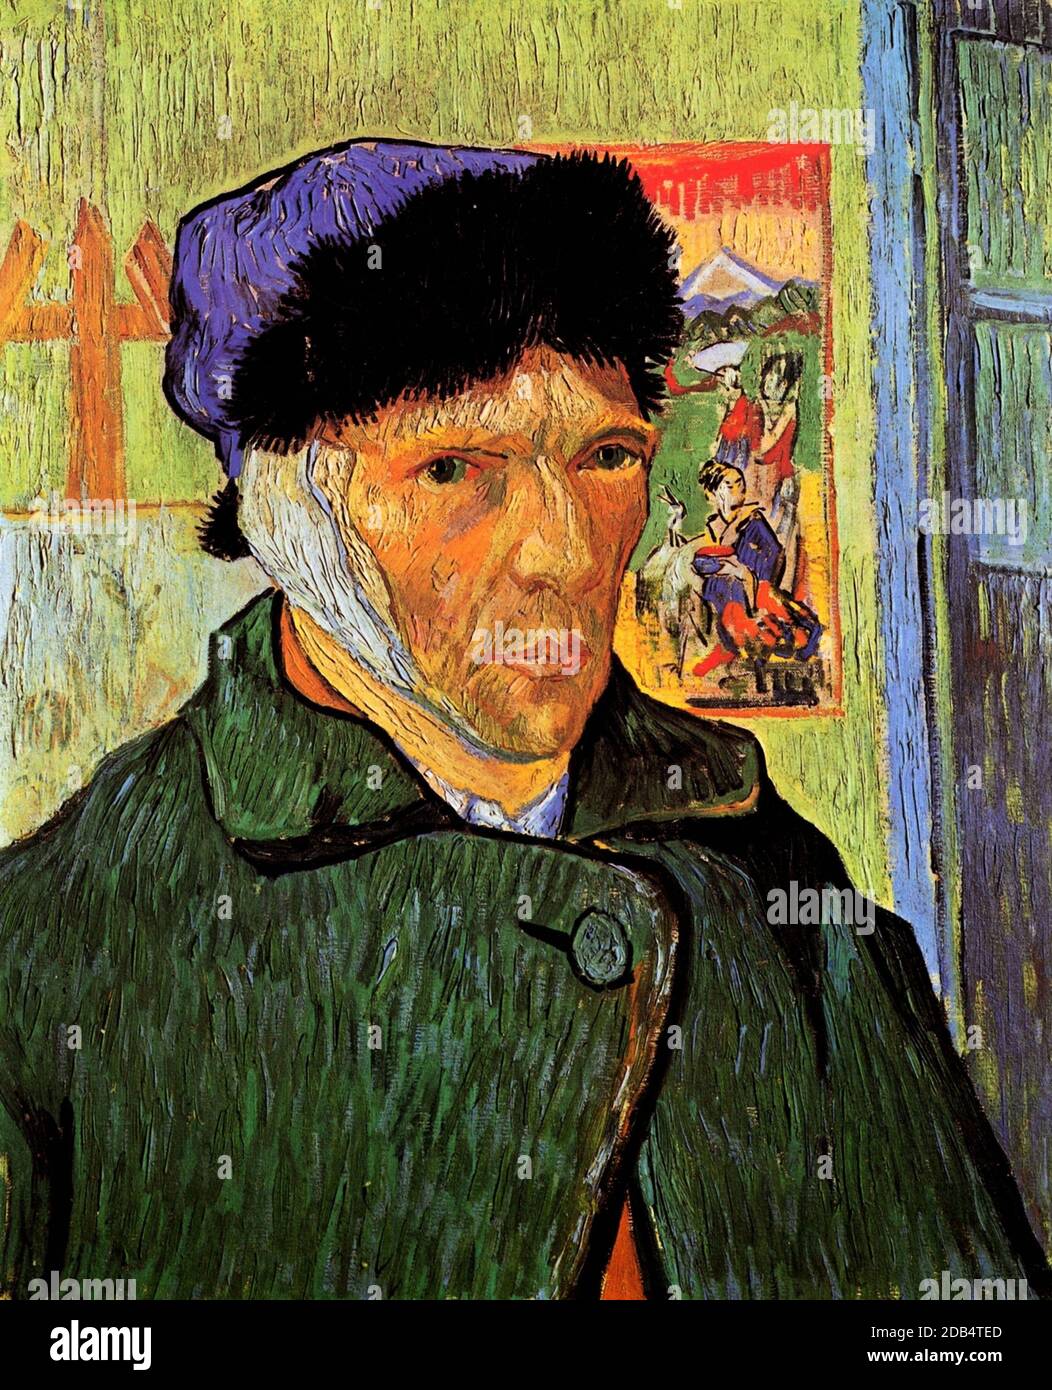 Vincent Van Gogh with Bandaged Ear Stock Photo - Alamy